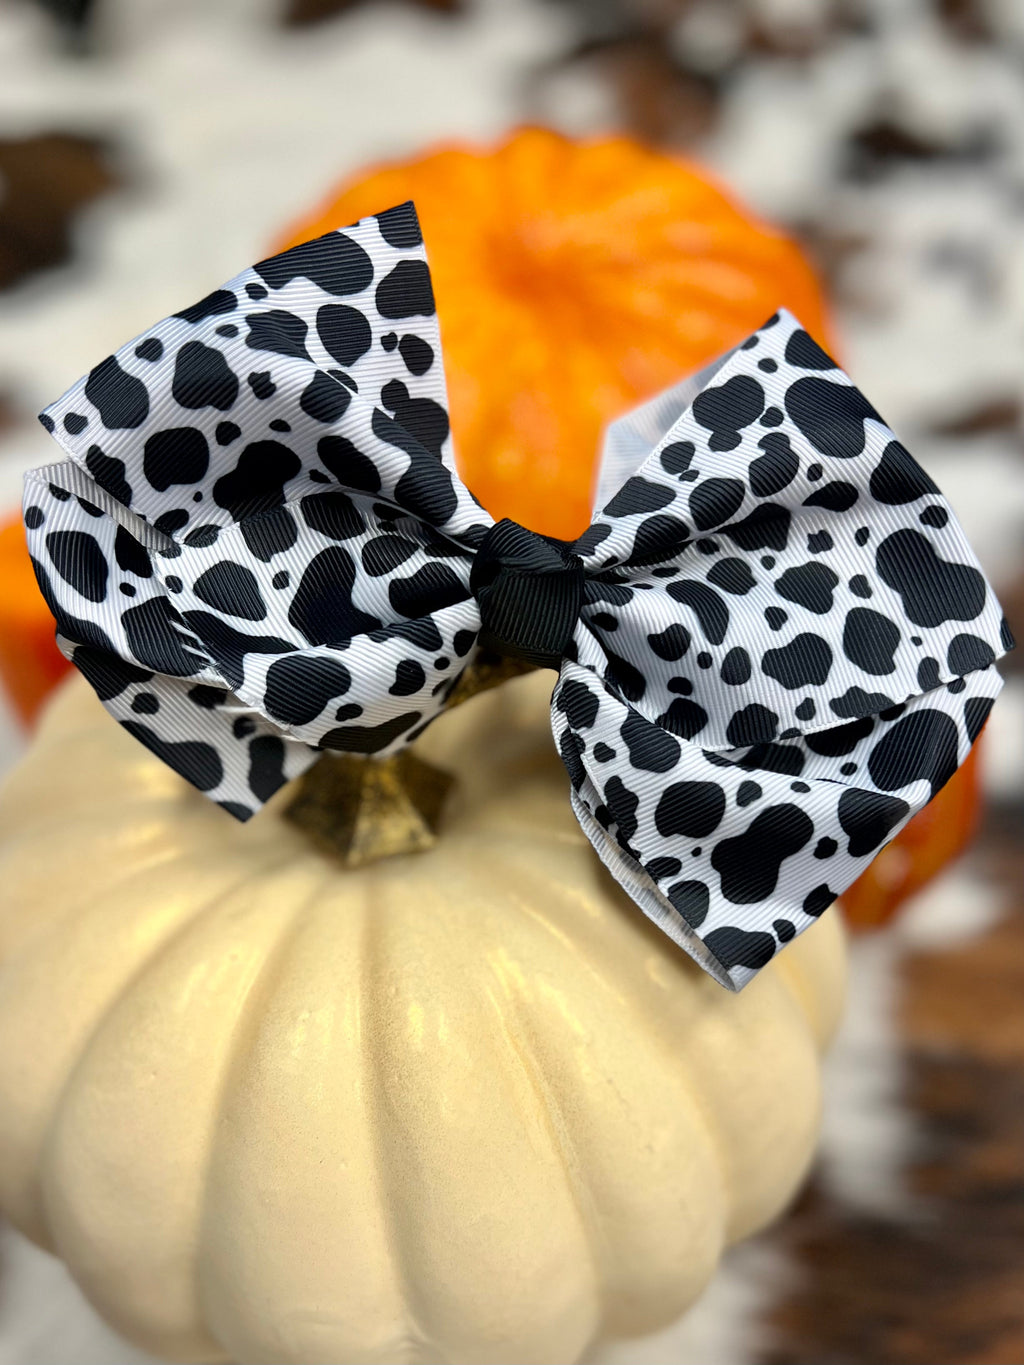 Look moooo-dorable in this Cow Print Bow! The black & white cow print of this 6" bow is sure to make a statement - without having to mooooo-ve an inch! Attached to an alligator clip for easy styling, you'll be ready to face every day with a bit of sass.